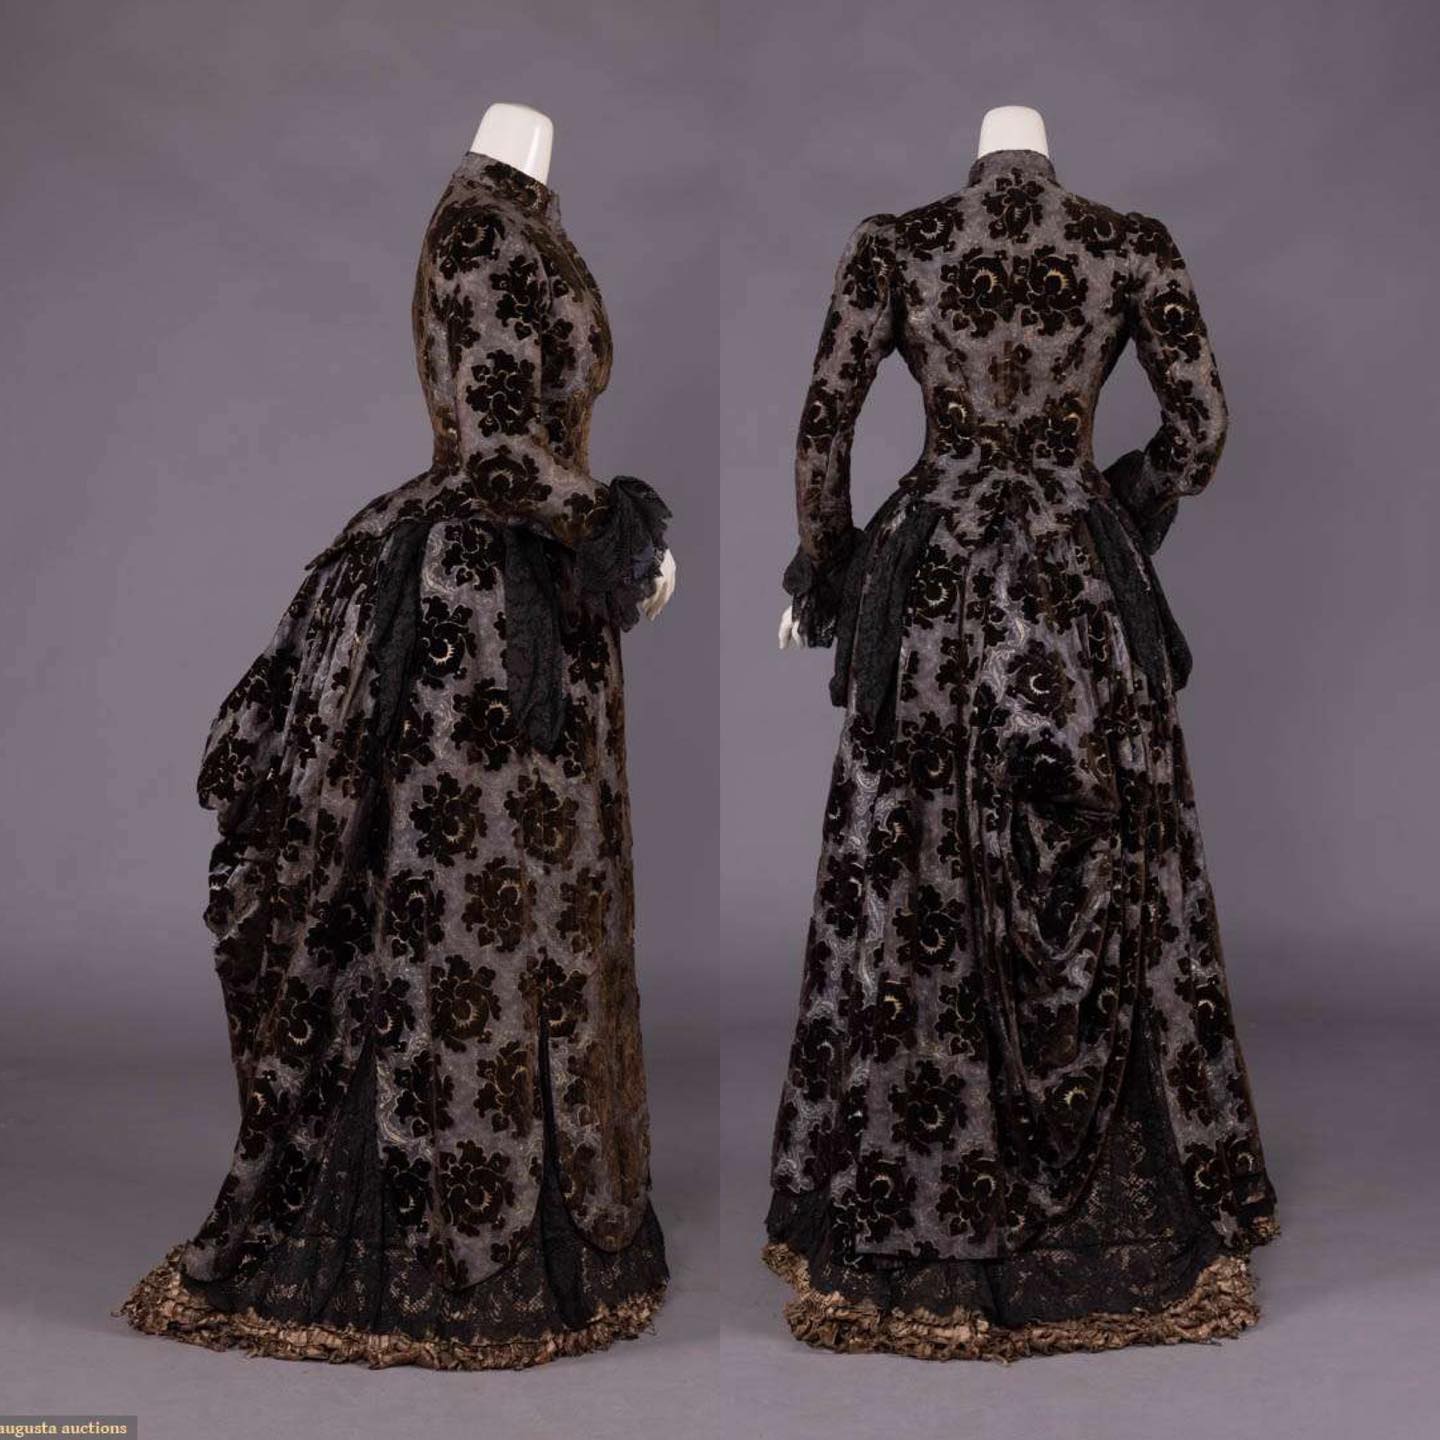 Day dress of cut velvet and patterned silk, c. 1885 Sold by Augusta Auctions, Spring Sartorial Surprise - Visions of Vintage, May, 2022 Sturbridge, MA